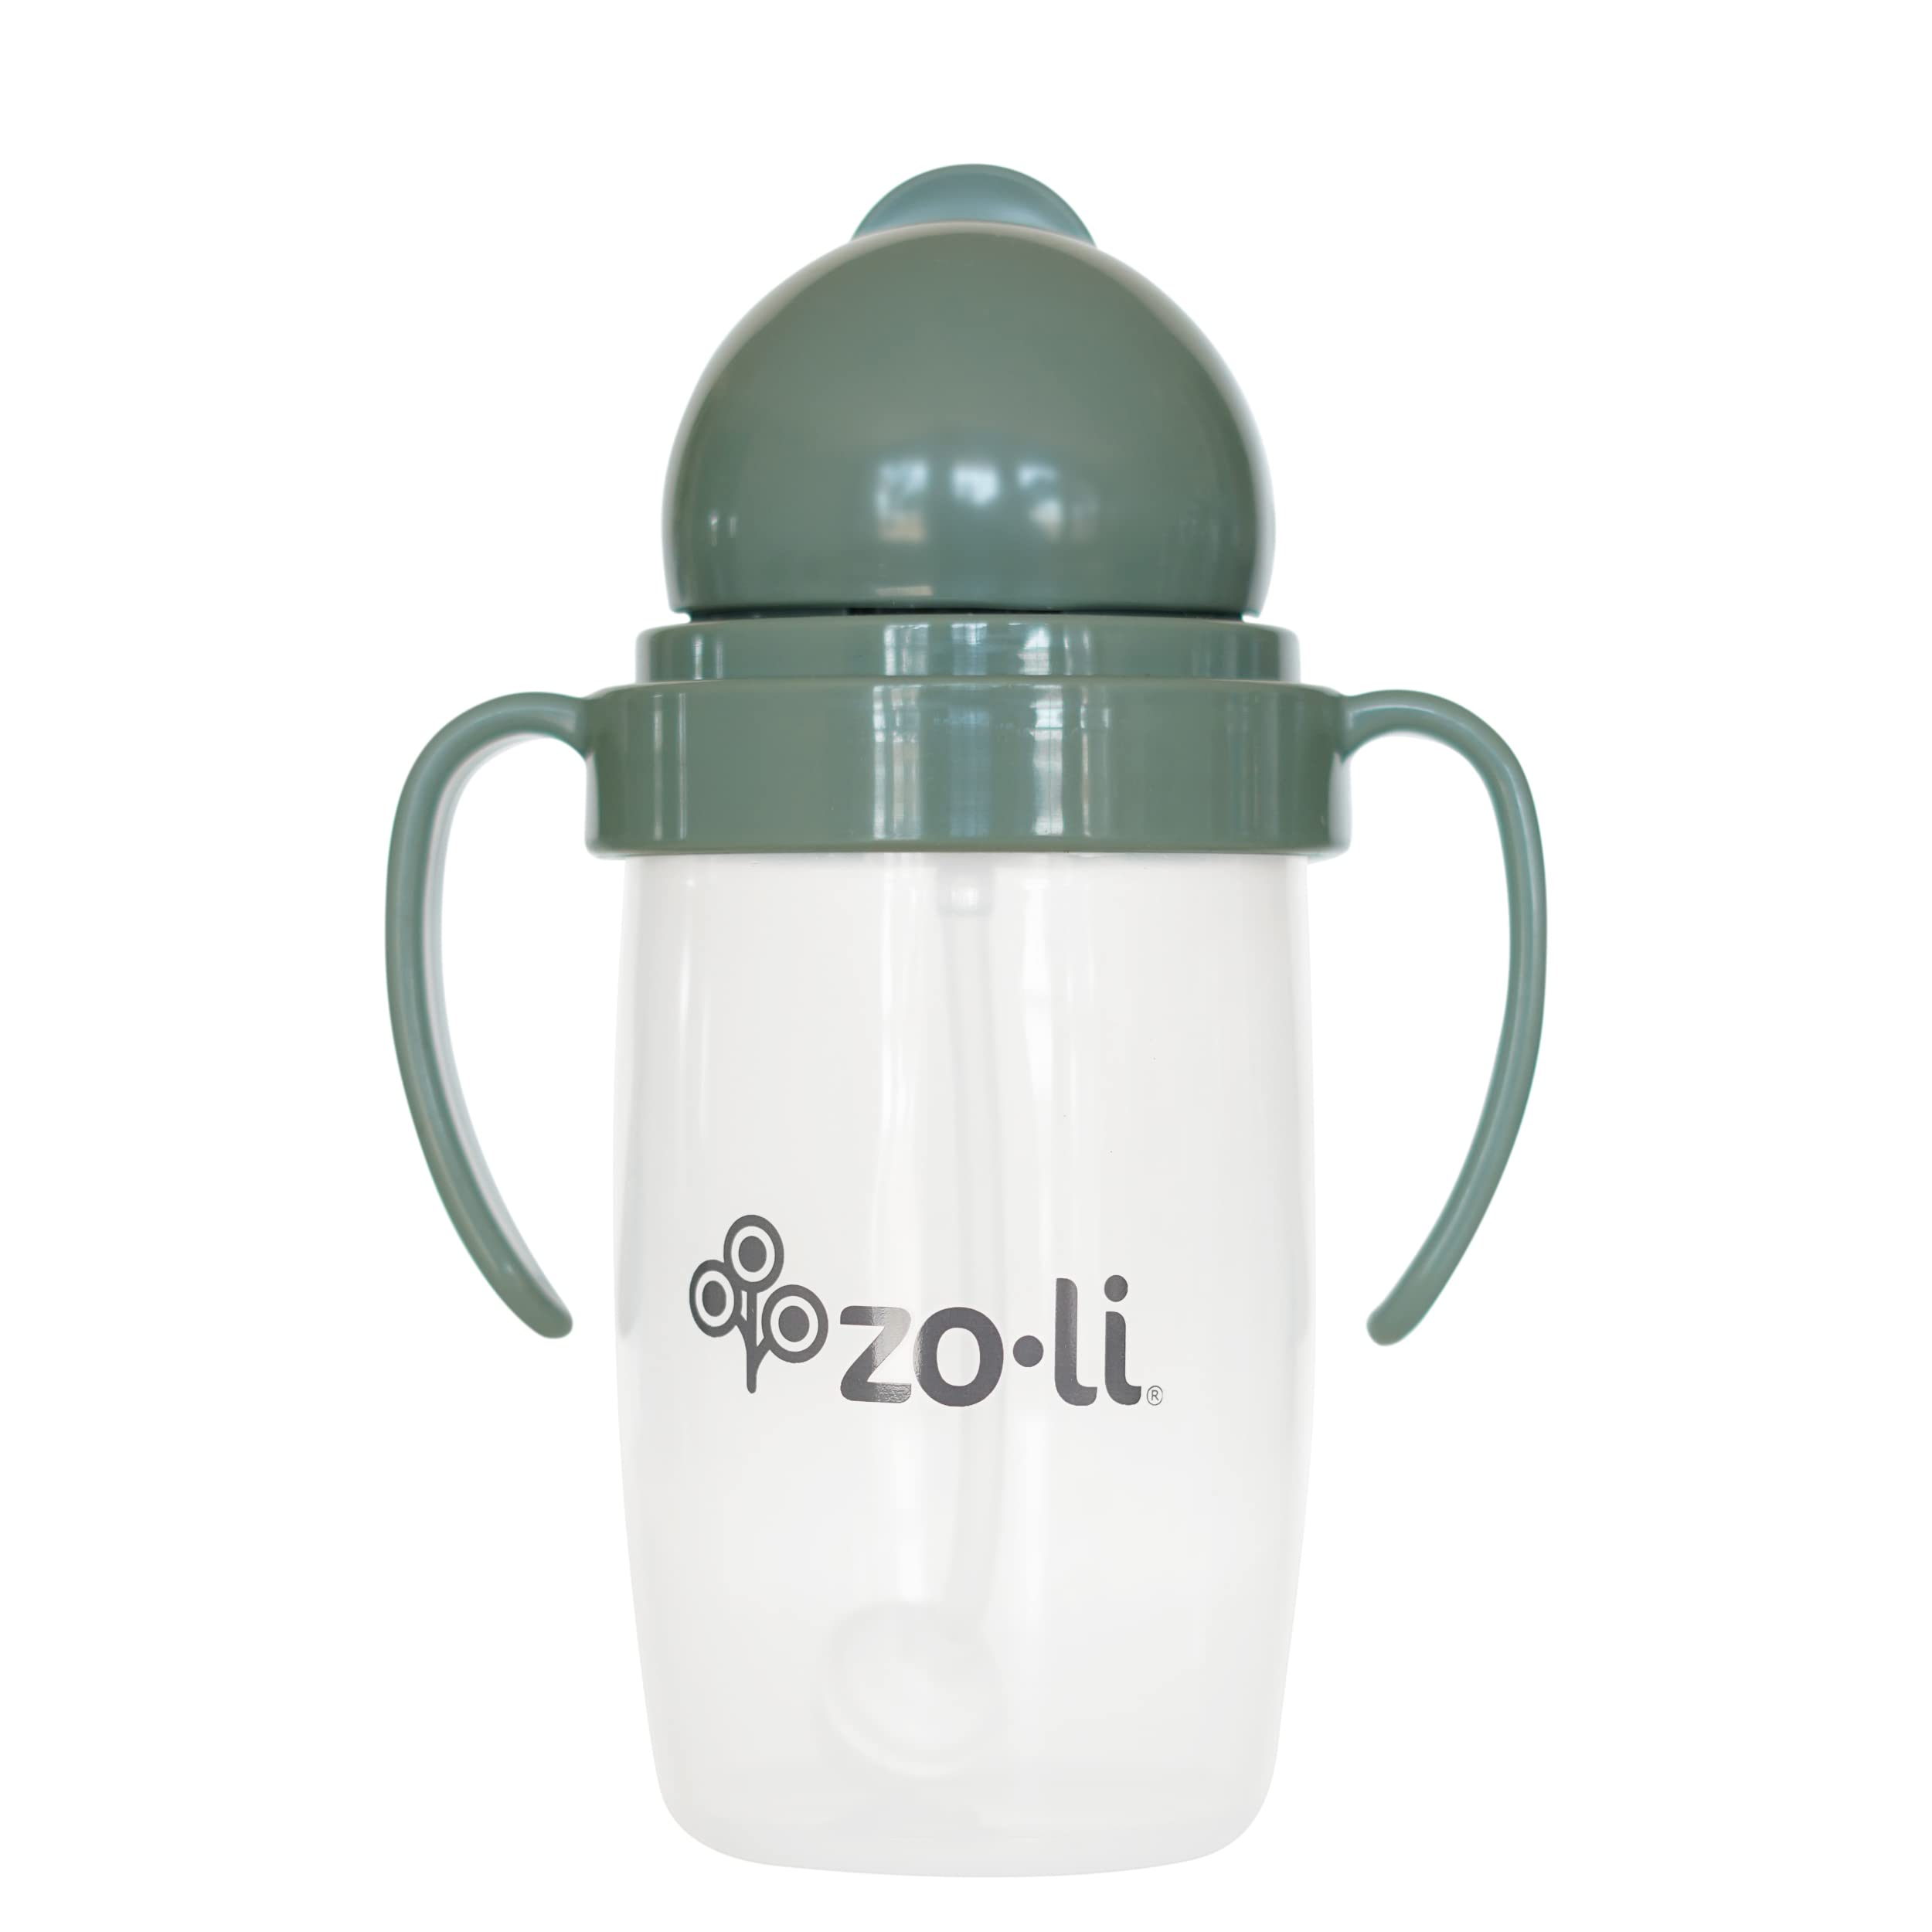 Any angle straw sippy cup  ZoLi BOT 2.0 weighted straw sippy spruce green  most loved training sippy cup toddler transition straw cup sippy cup with  handles